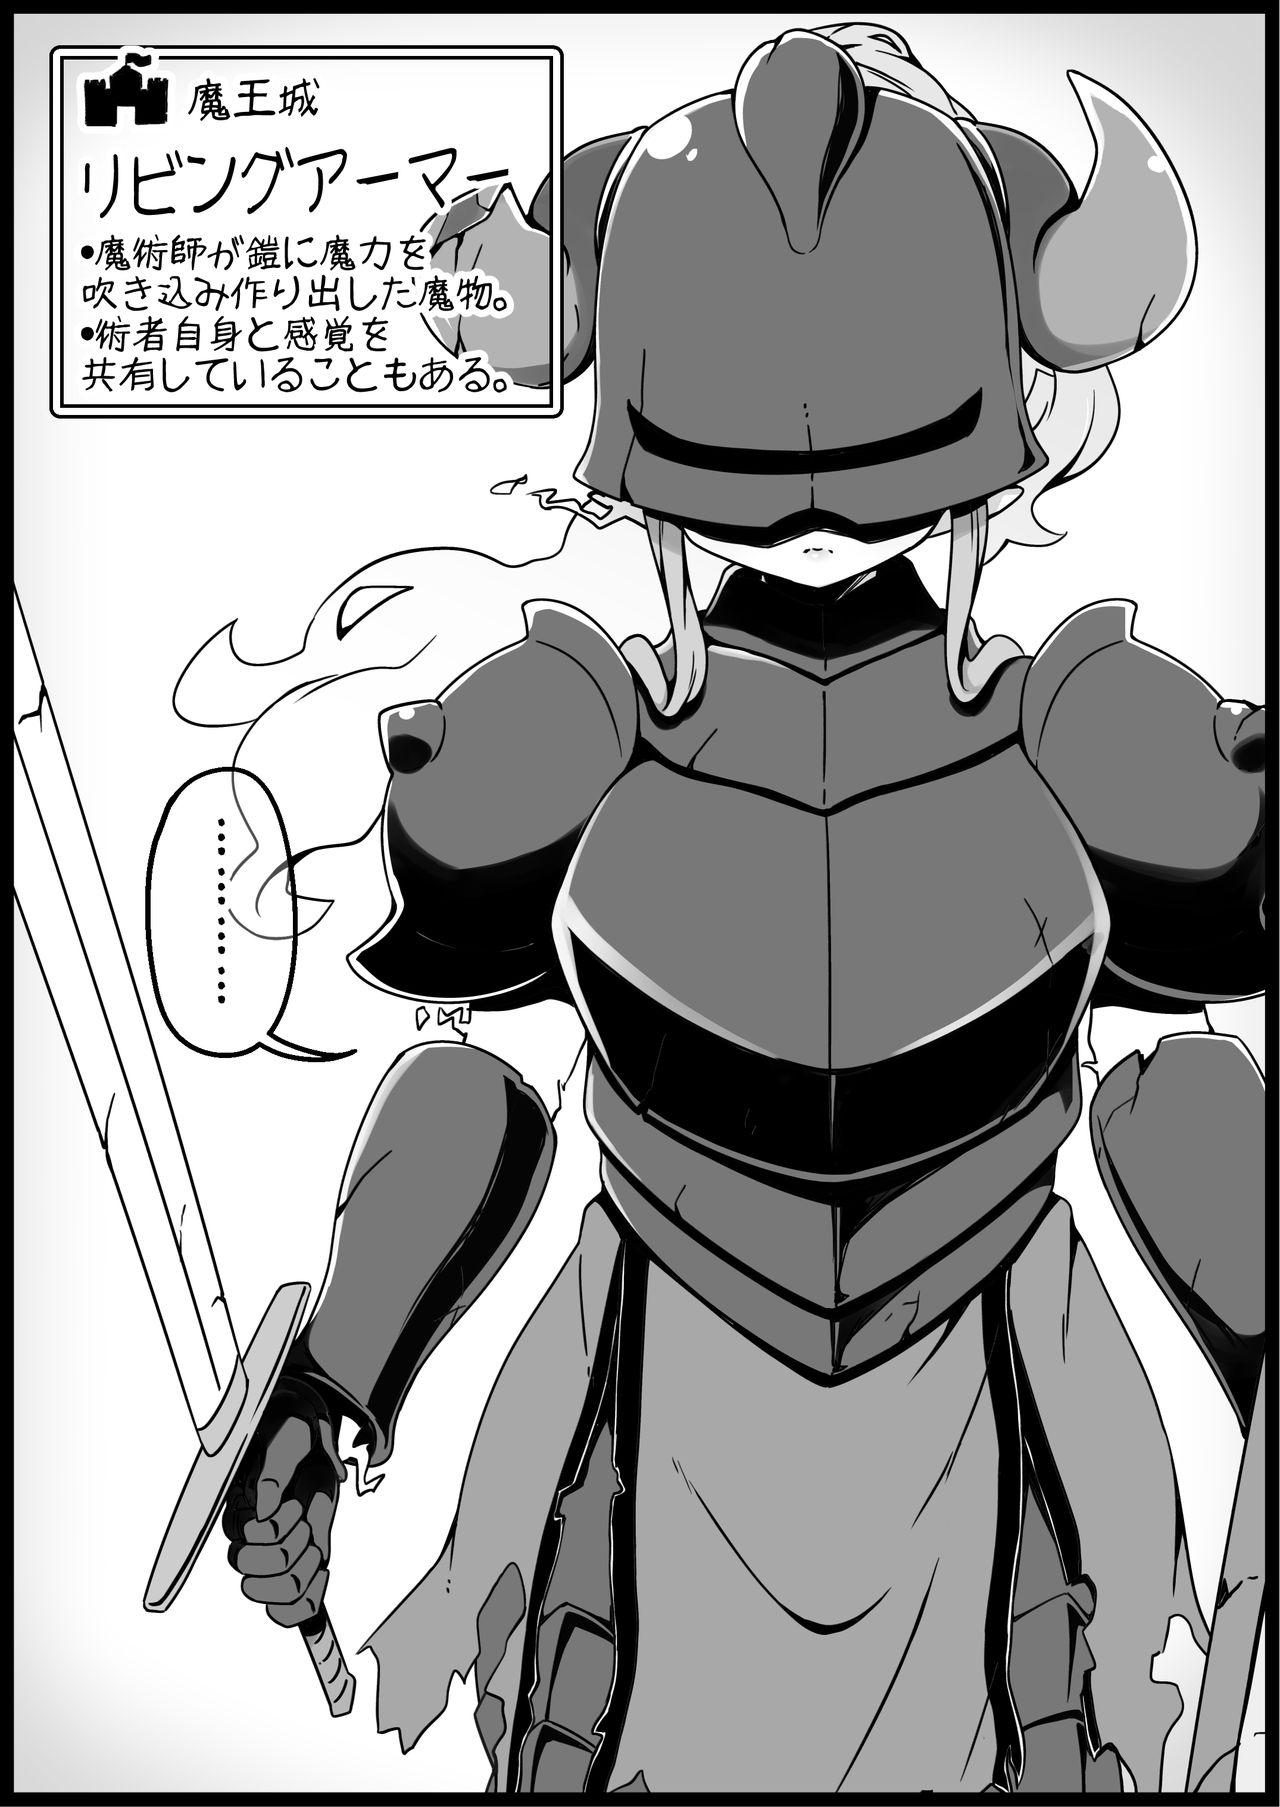 [Succubus Egg] Fantasy World 2 Too Forgiving to Heroes-Continued NPC (mob) Opponent-Centered Short H Manga Collection- 32